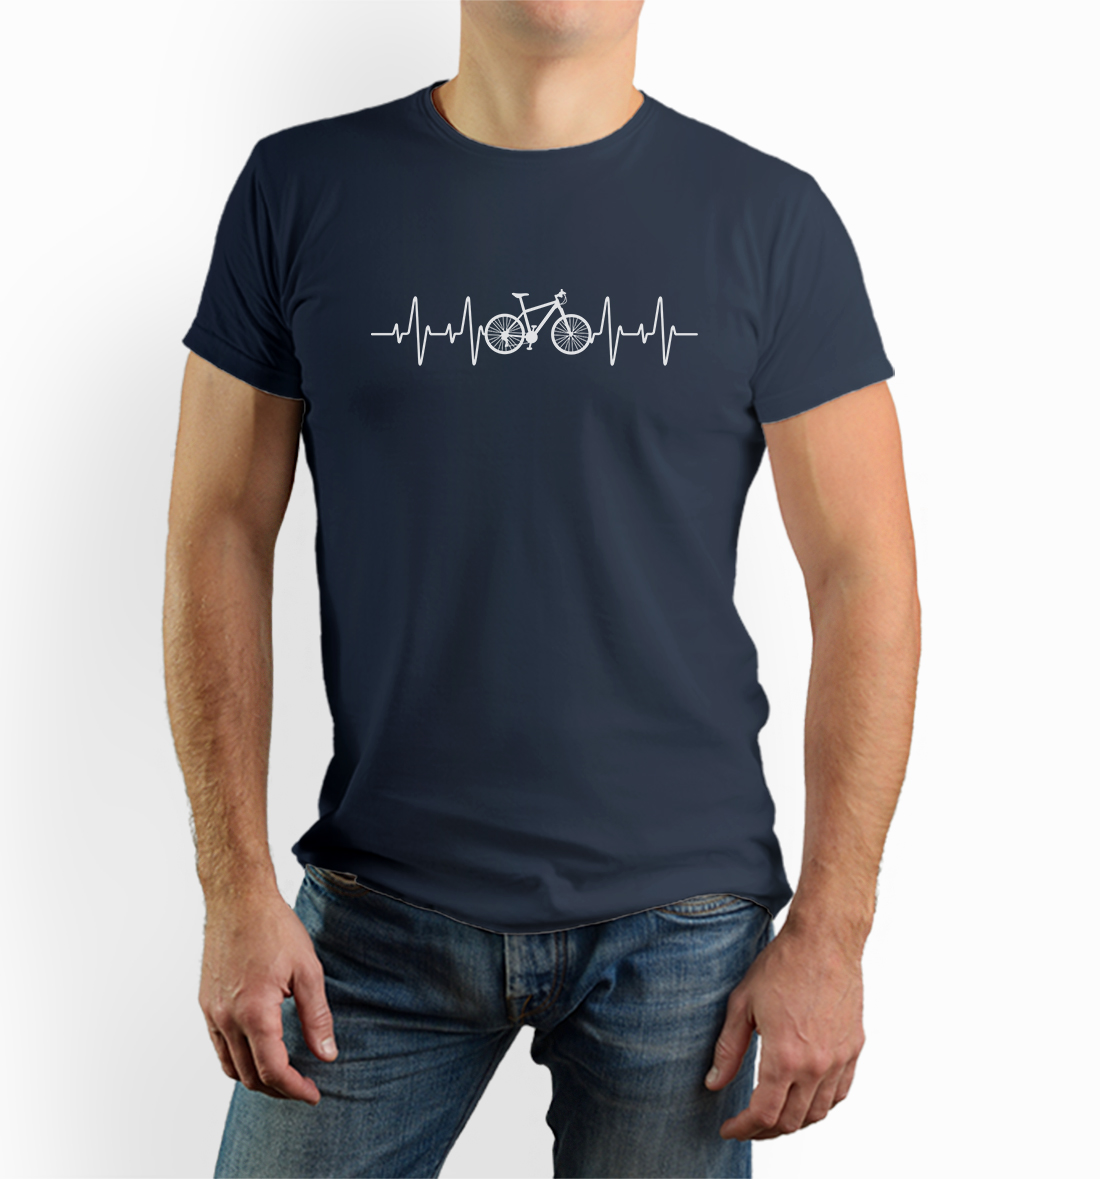 Tshirt with a bicycle T-shirt